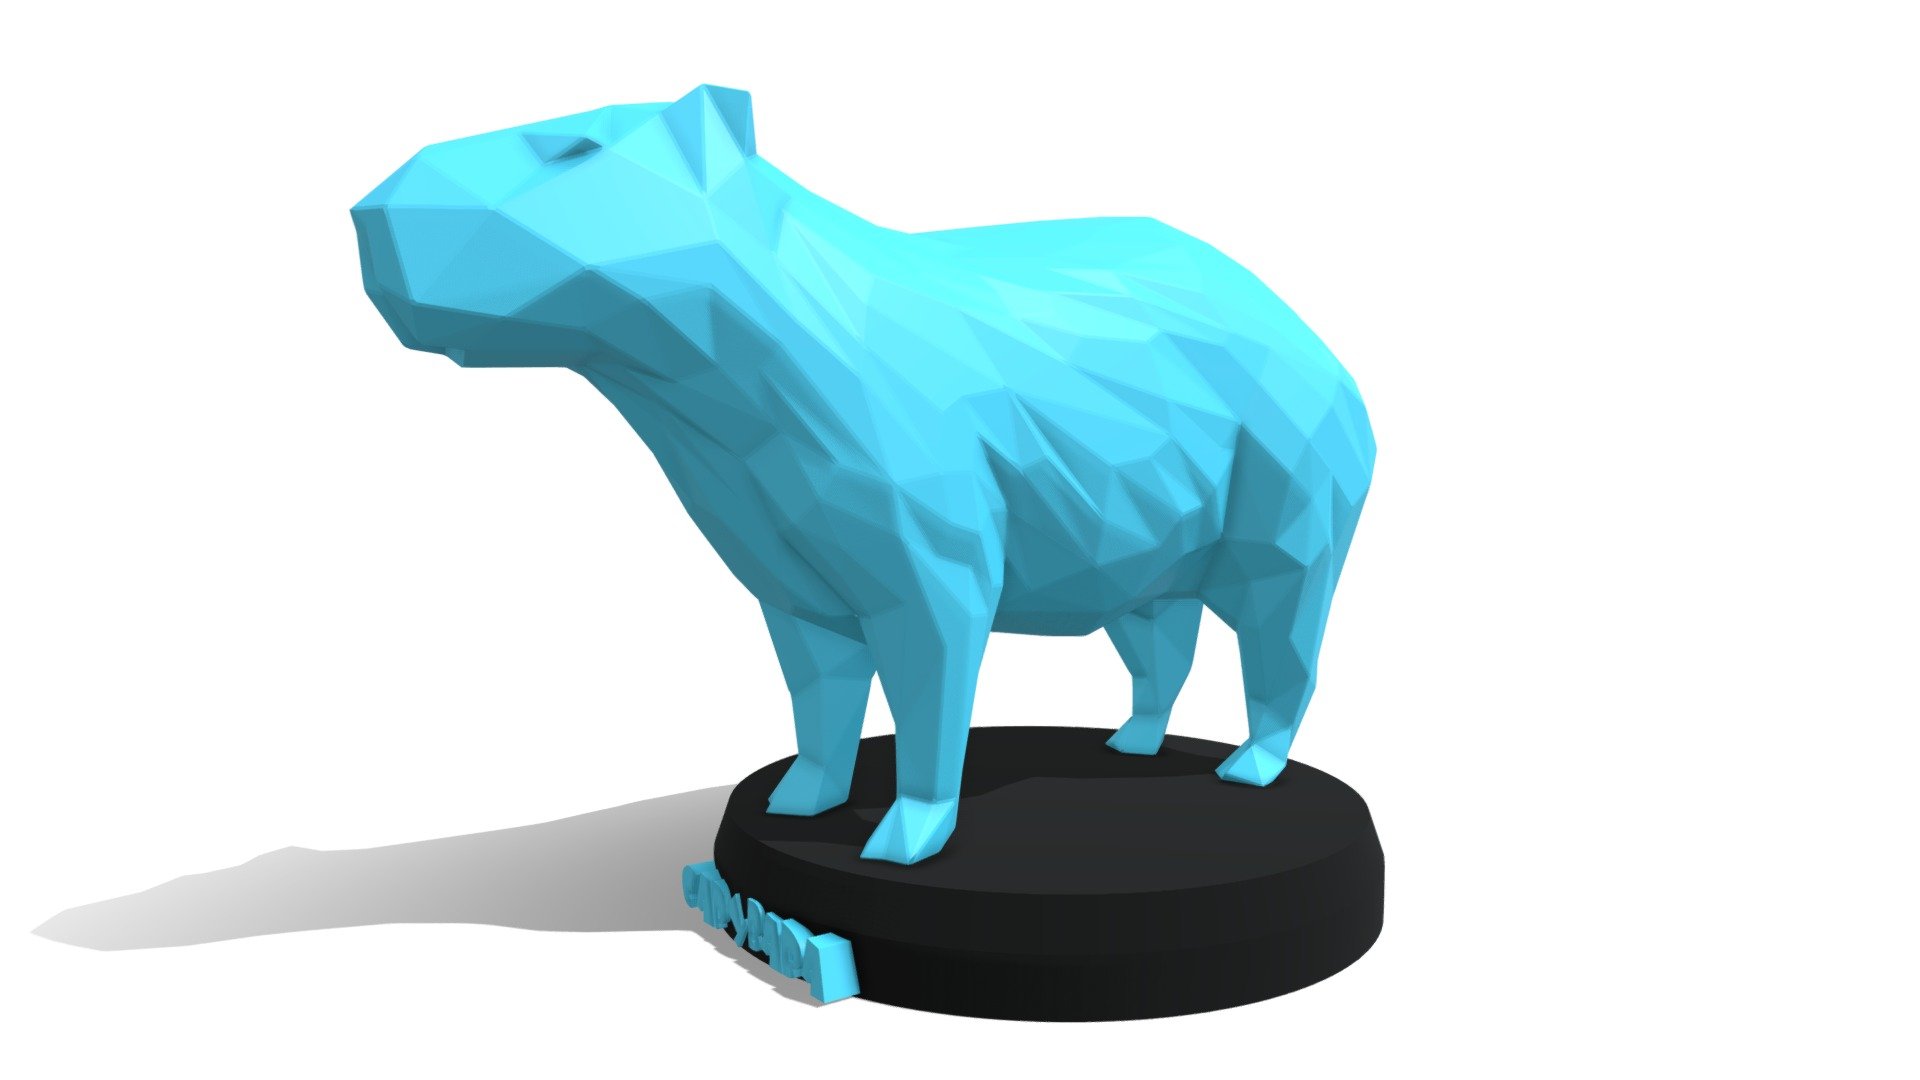 Polygonal 3D Model with Parametric modeling with gold material, make it recommend for :




Basic modeling 

Rigging 

sculpting 

Become Statue

Decorate

3D Print File

Toy

Have fun  :) - Poly Capybara - Buy Royalty Free 3D model by Puppy3D 3d model